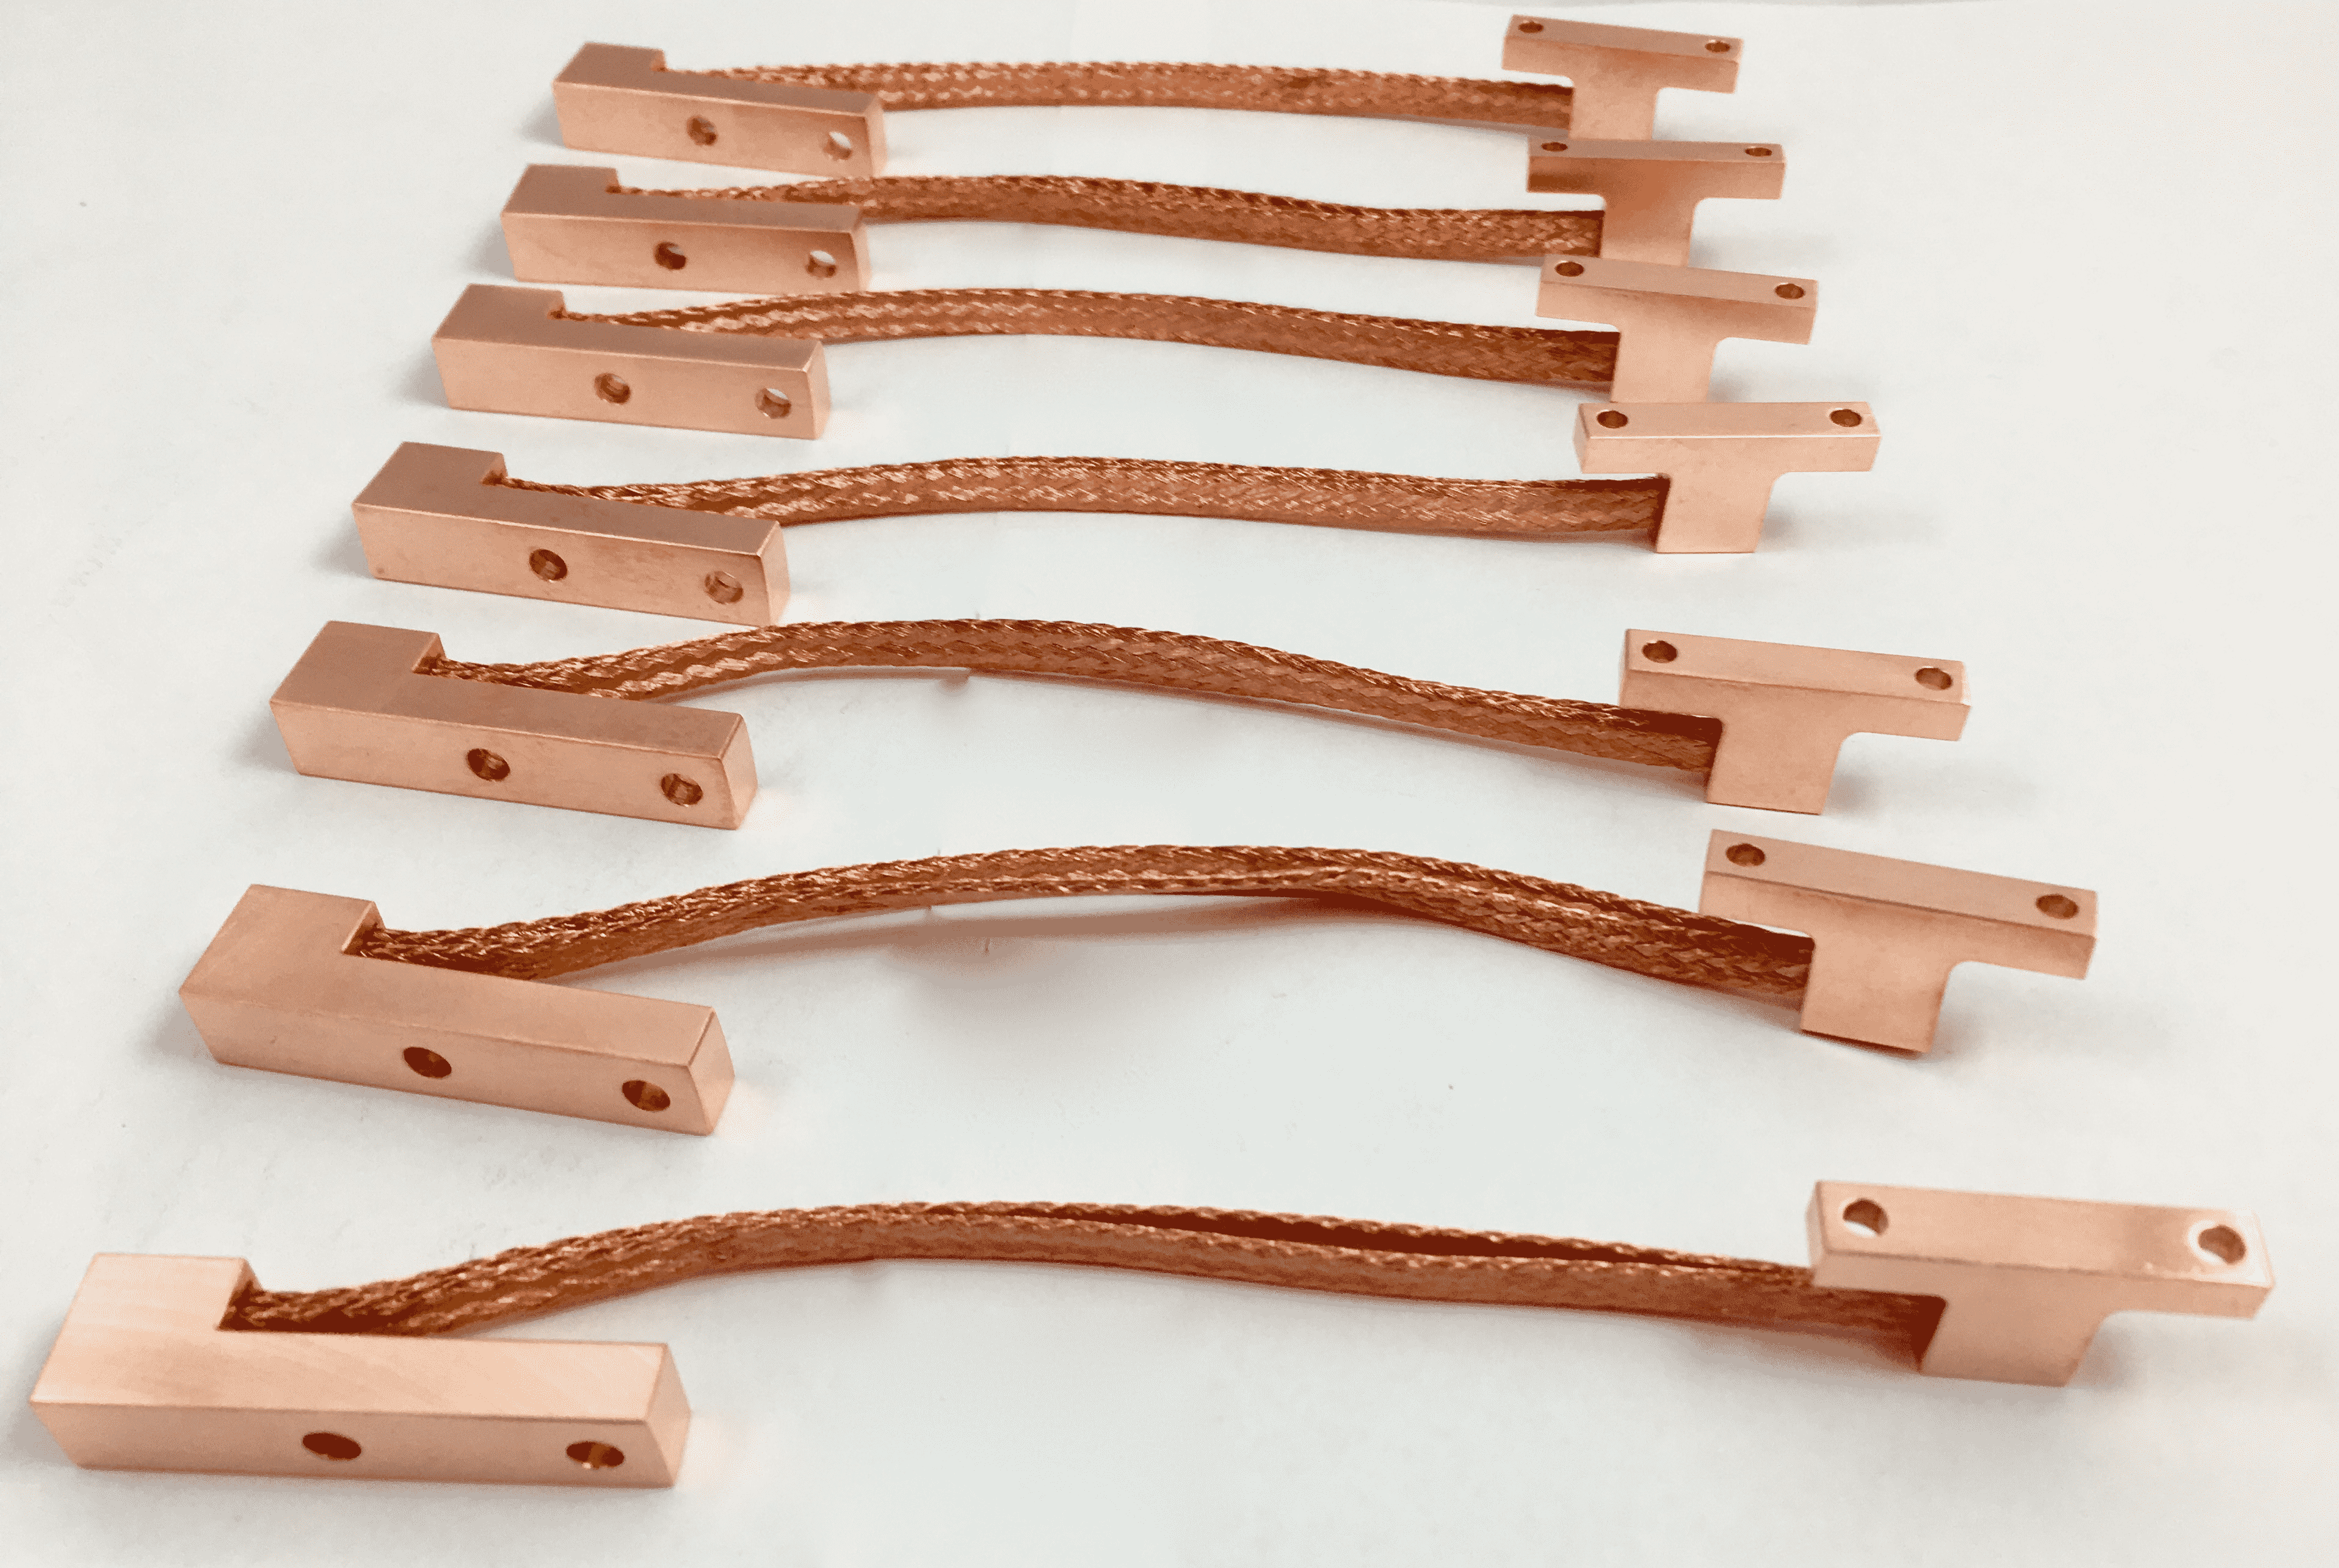 Specialized high purity braided copper thermal straps for moving heat while providing a high degree of rotational motion.